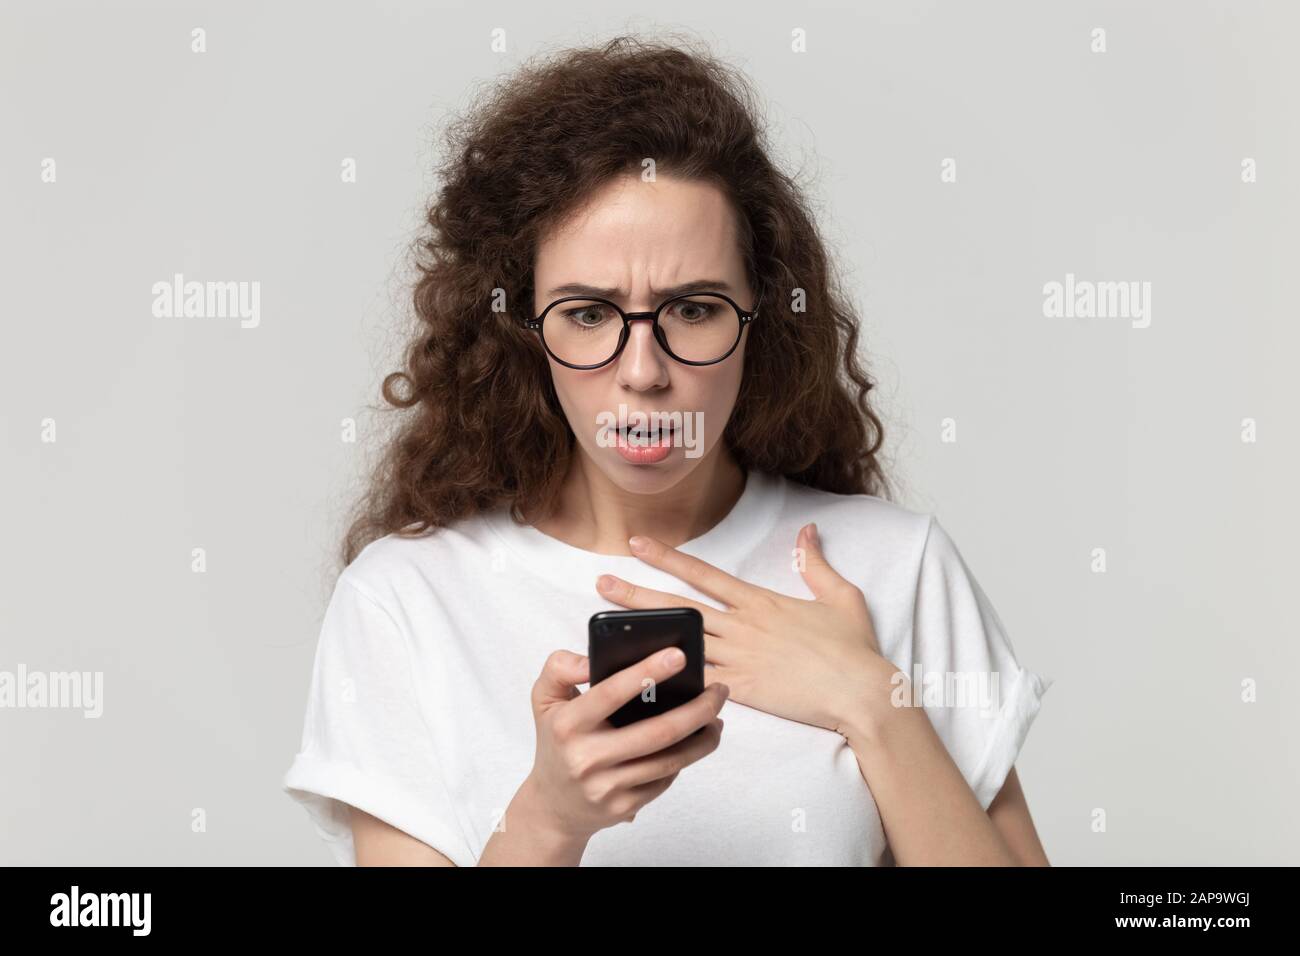 Scared worried millennial woman looking at device screen. Stock Photo